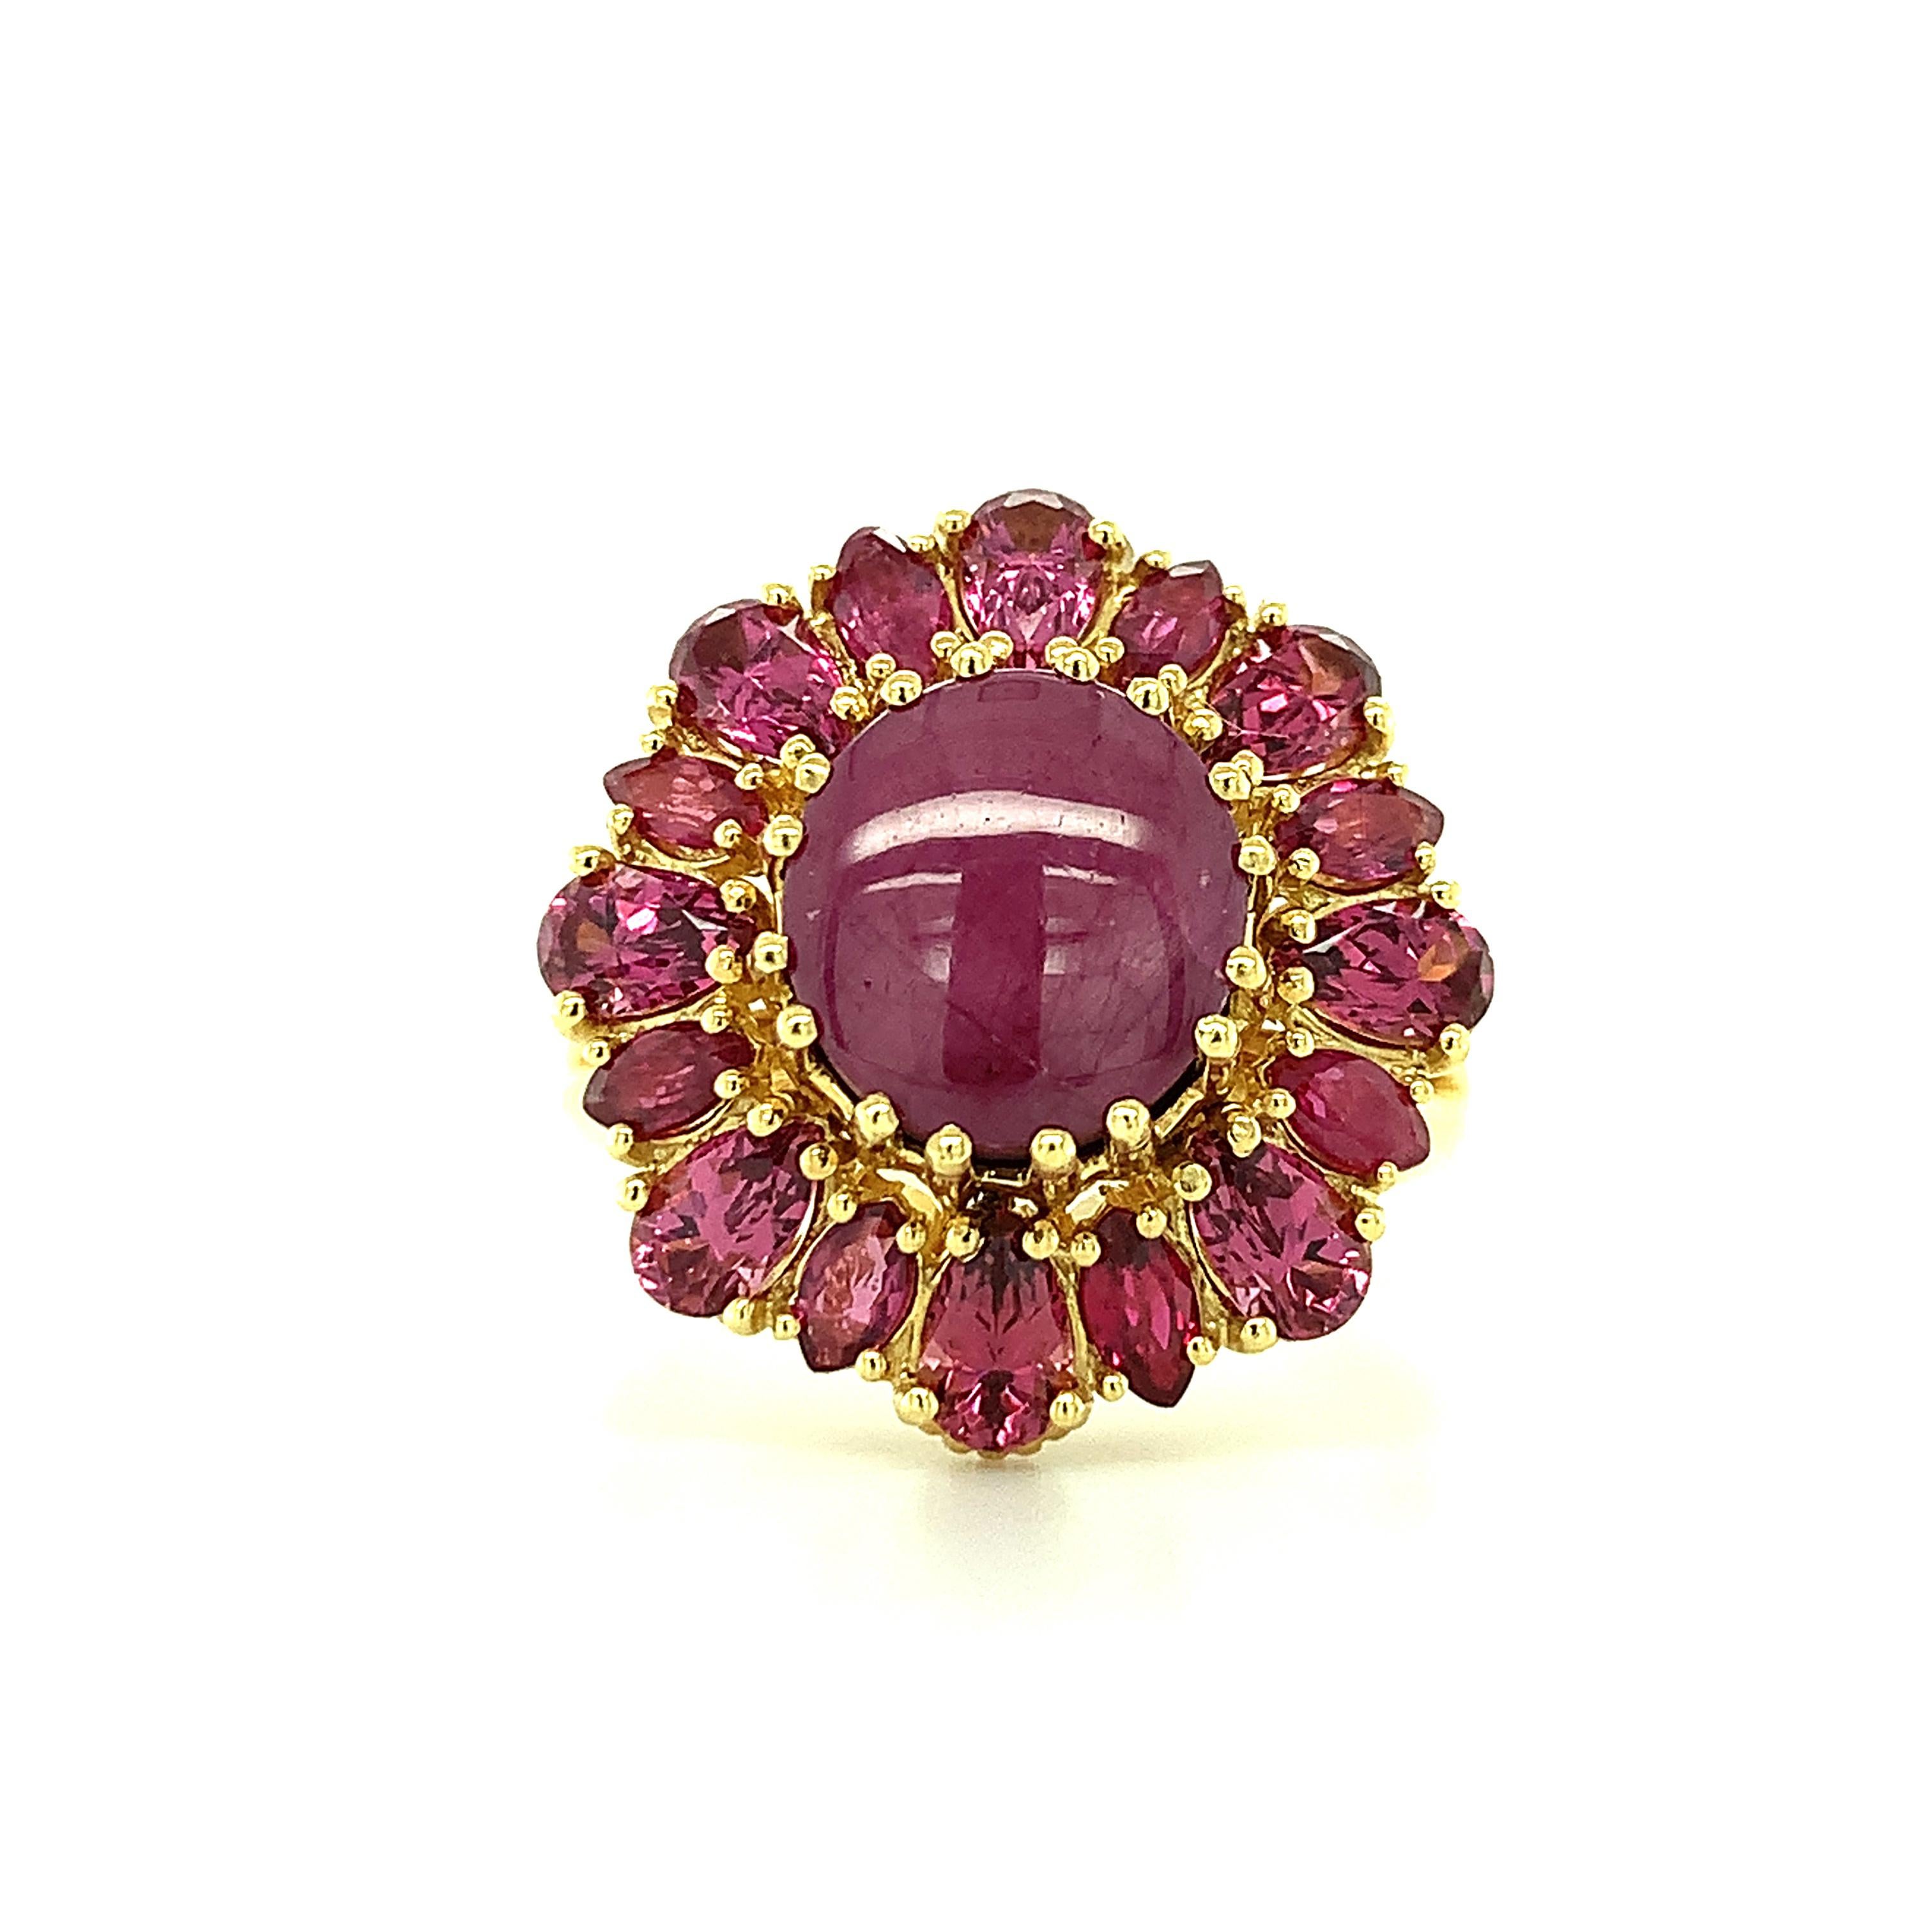 This starburst cocktail ring features a strawberry milkshake-color star ruby, artfully framed by coordinating pear shaped, pink rose colored rhodolite garnets and marquise shaped rubies. Handmade in 18k yellow gold in our signature retro-style ring